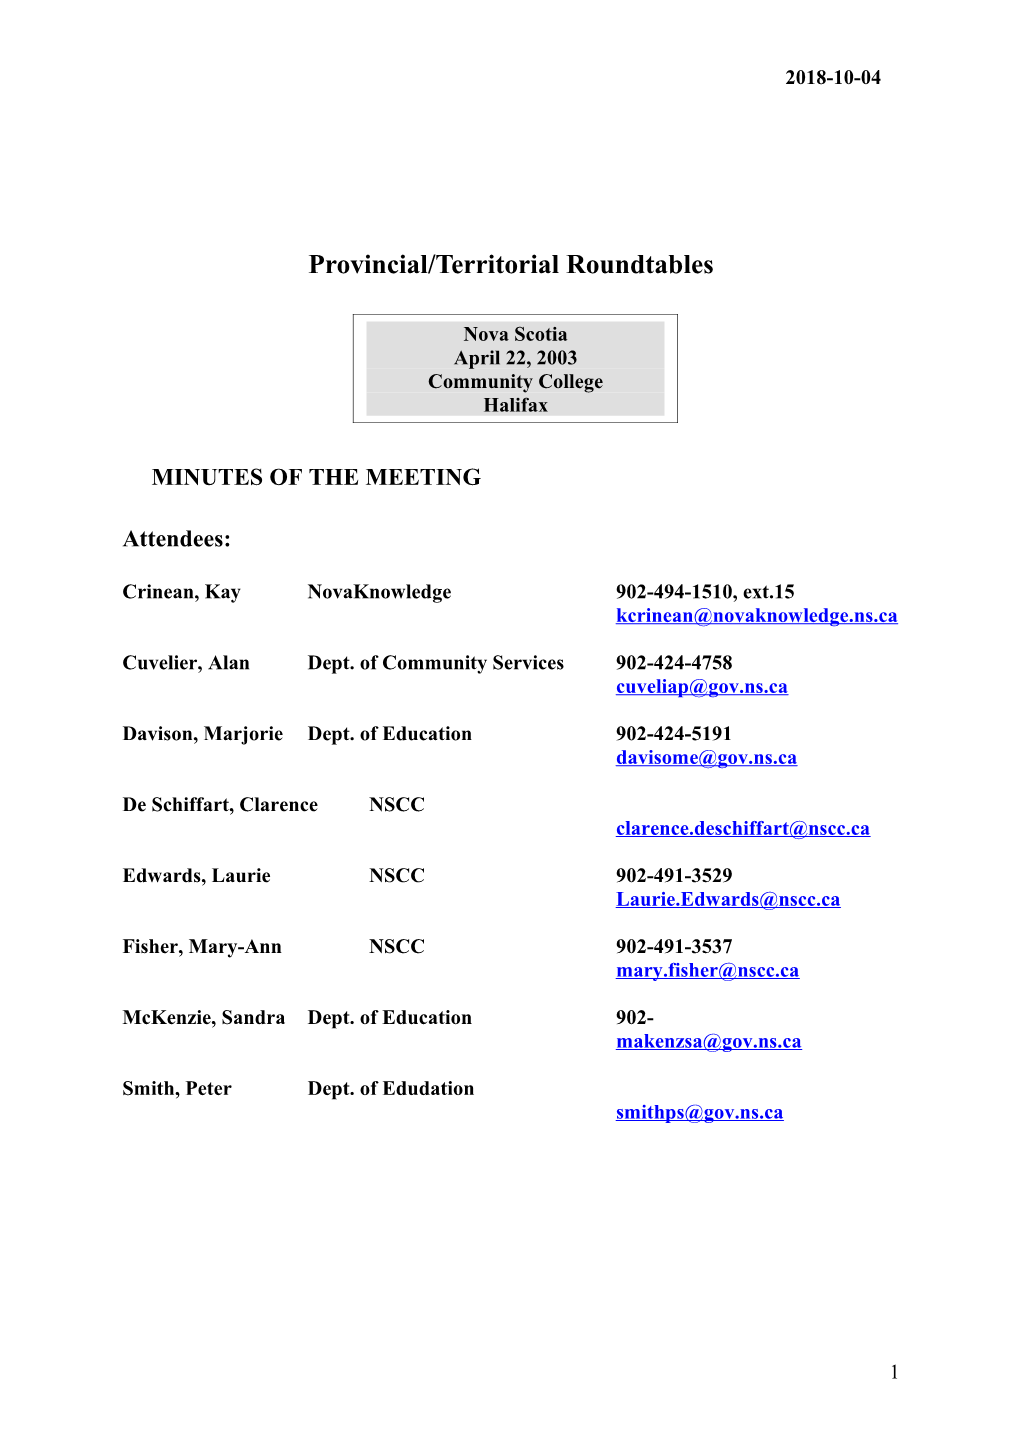 Provincial/Territorial Roundtables